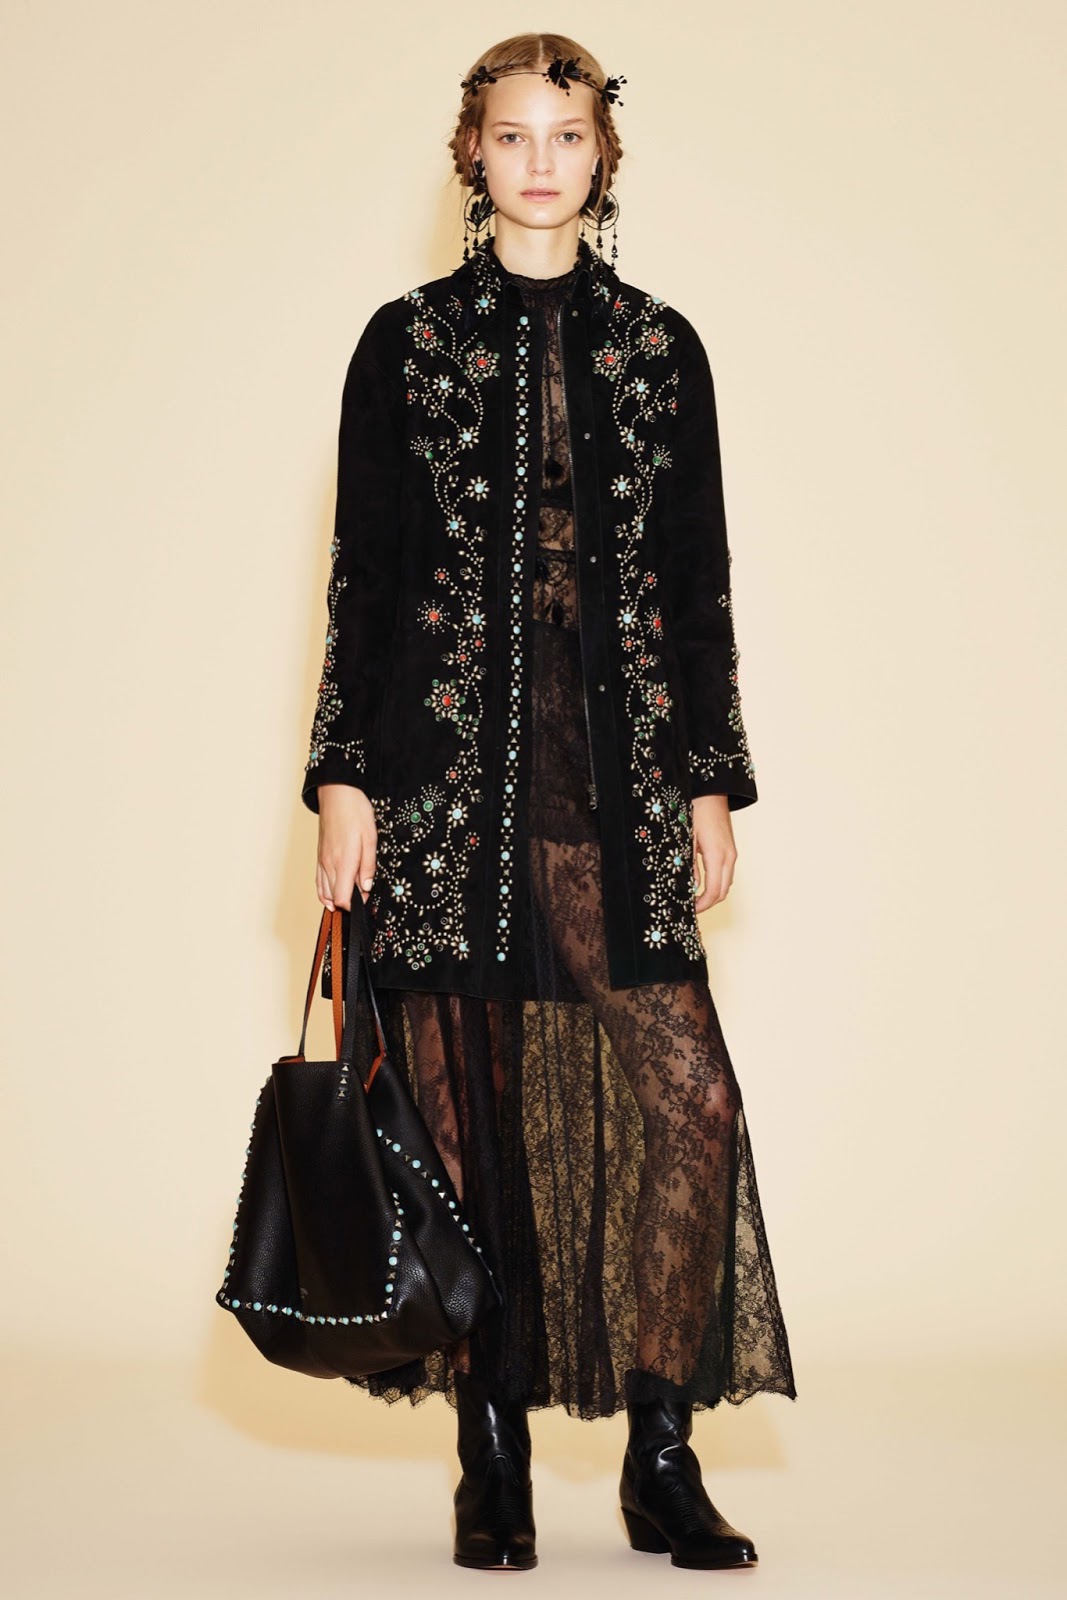 Valentino Resort Collection July 3, 2015 | ZsaZsa Bellagio - Like No Other